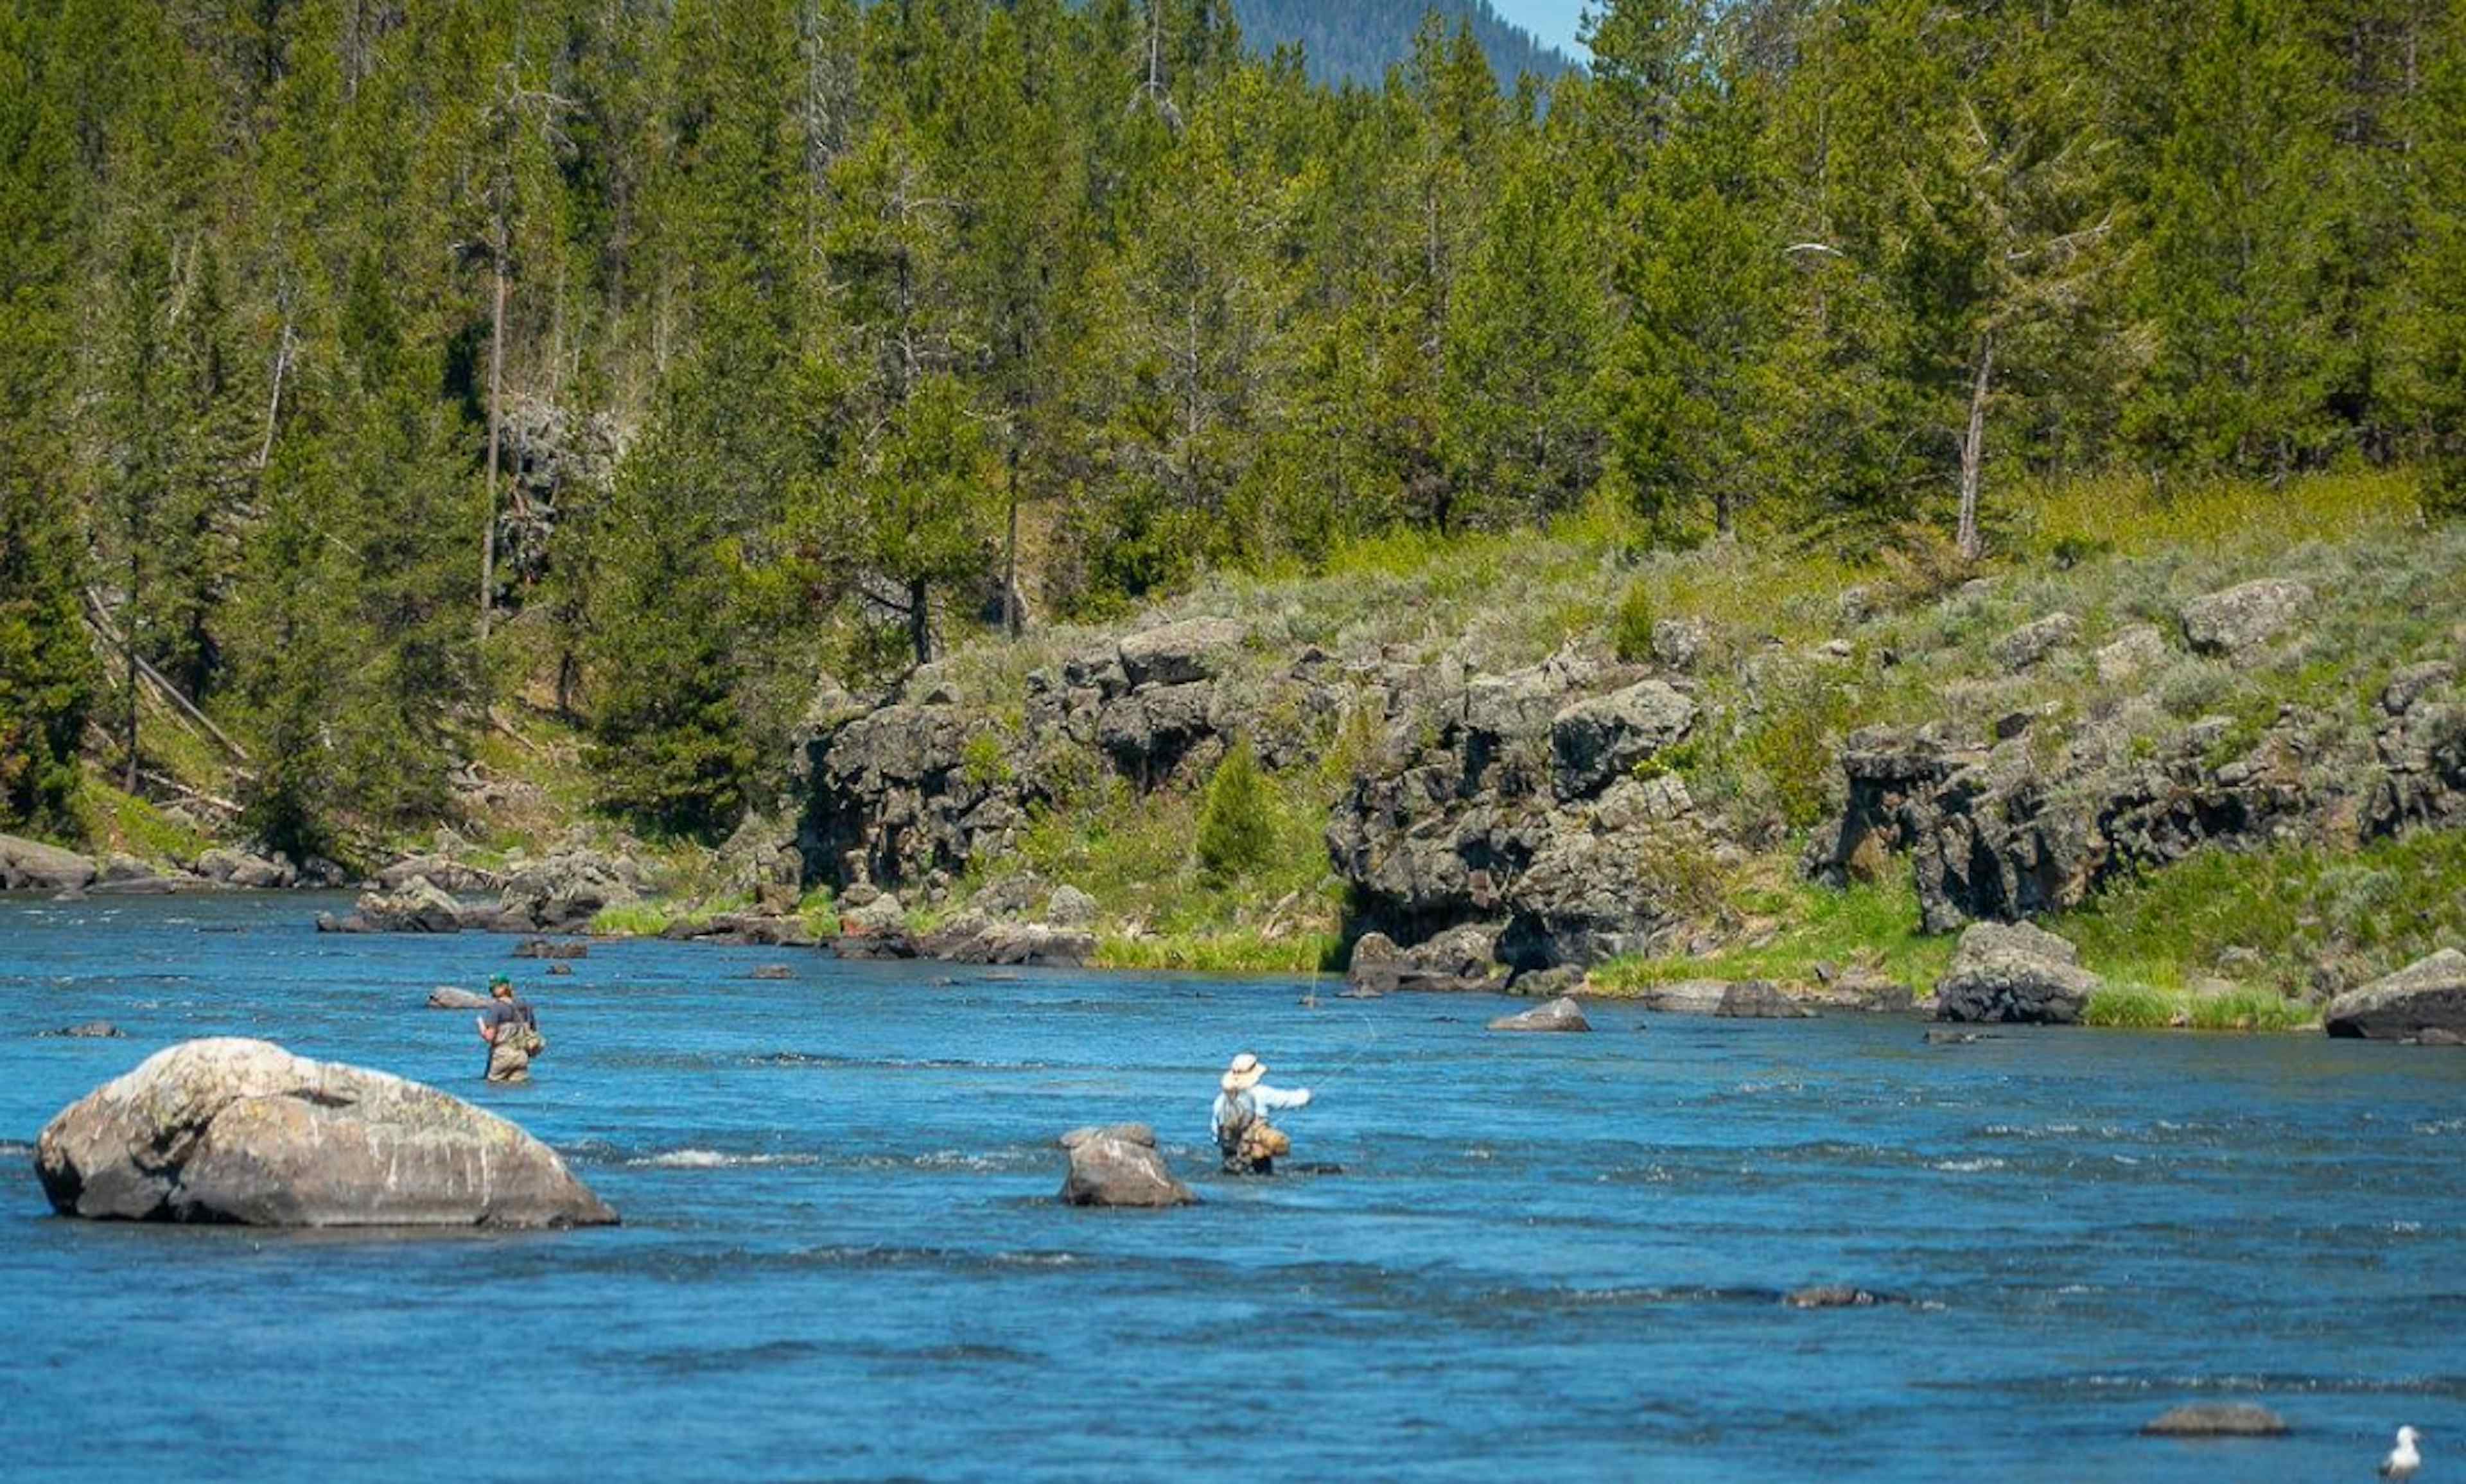 Fly fishermen in a river in Dubois ID, a part of Yellowstone Teton Territory.